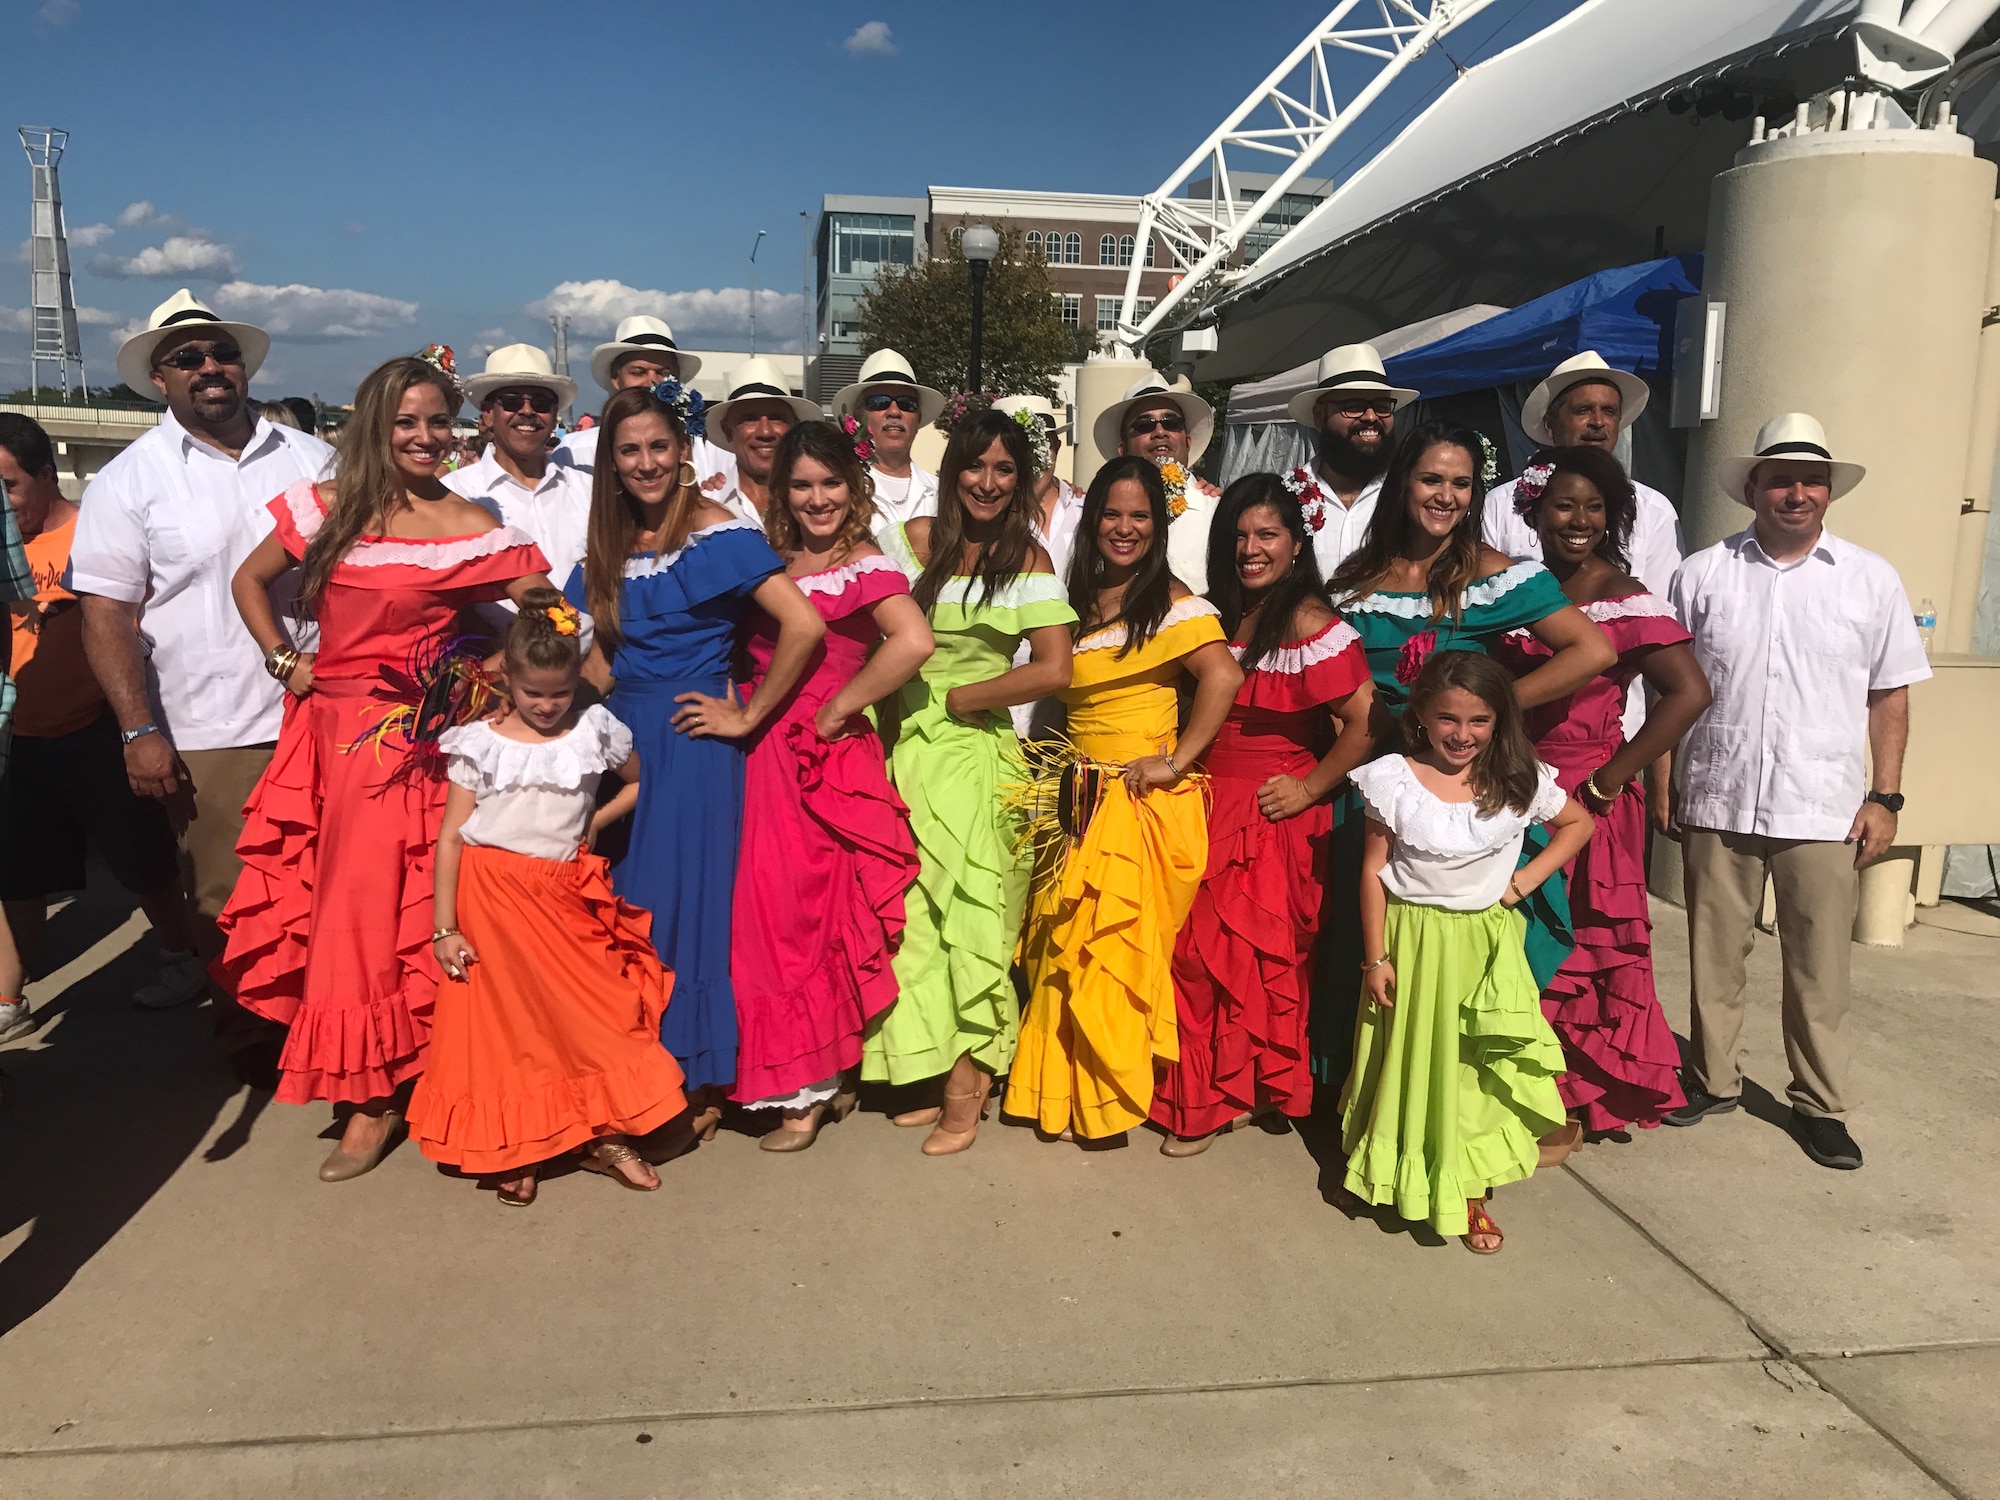 Music and dance ensemble Rondalla Puerto Rico is pictured at the 2018 Hispanic Heritage Festival in Dayton, Ohio. Miguel Maldonado, group member and Air Force Research Laboratory Aerospace Systems Directorate Diversity Council chair, is leading the directorate’s Hispanic Heritage Month activities, taking place Sept. 15-Oct. 15, 2019. (Photo courtesy of Maria Maldonado)